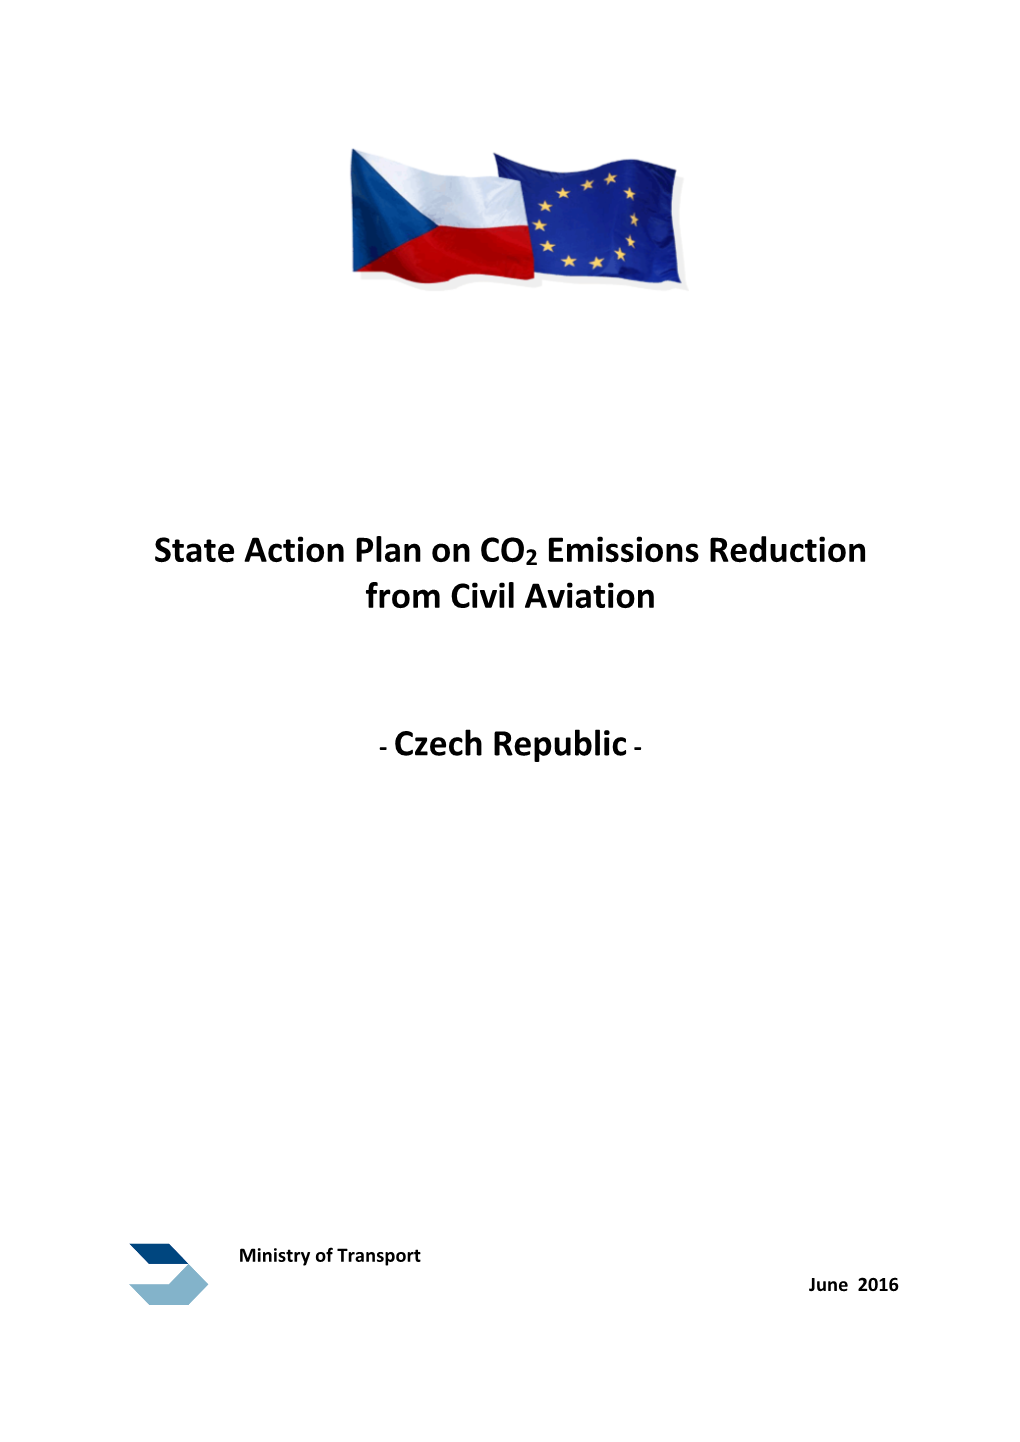 State Action Plan on CO2 Emissions Reduction from Civil Aviation